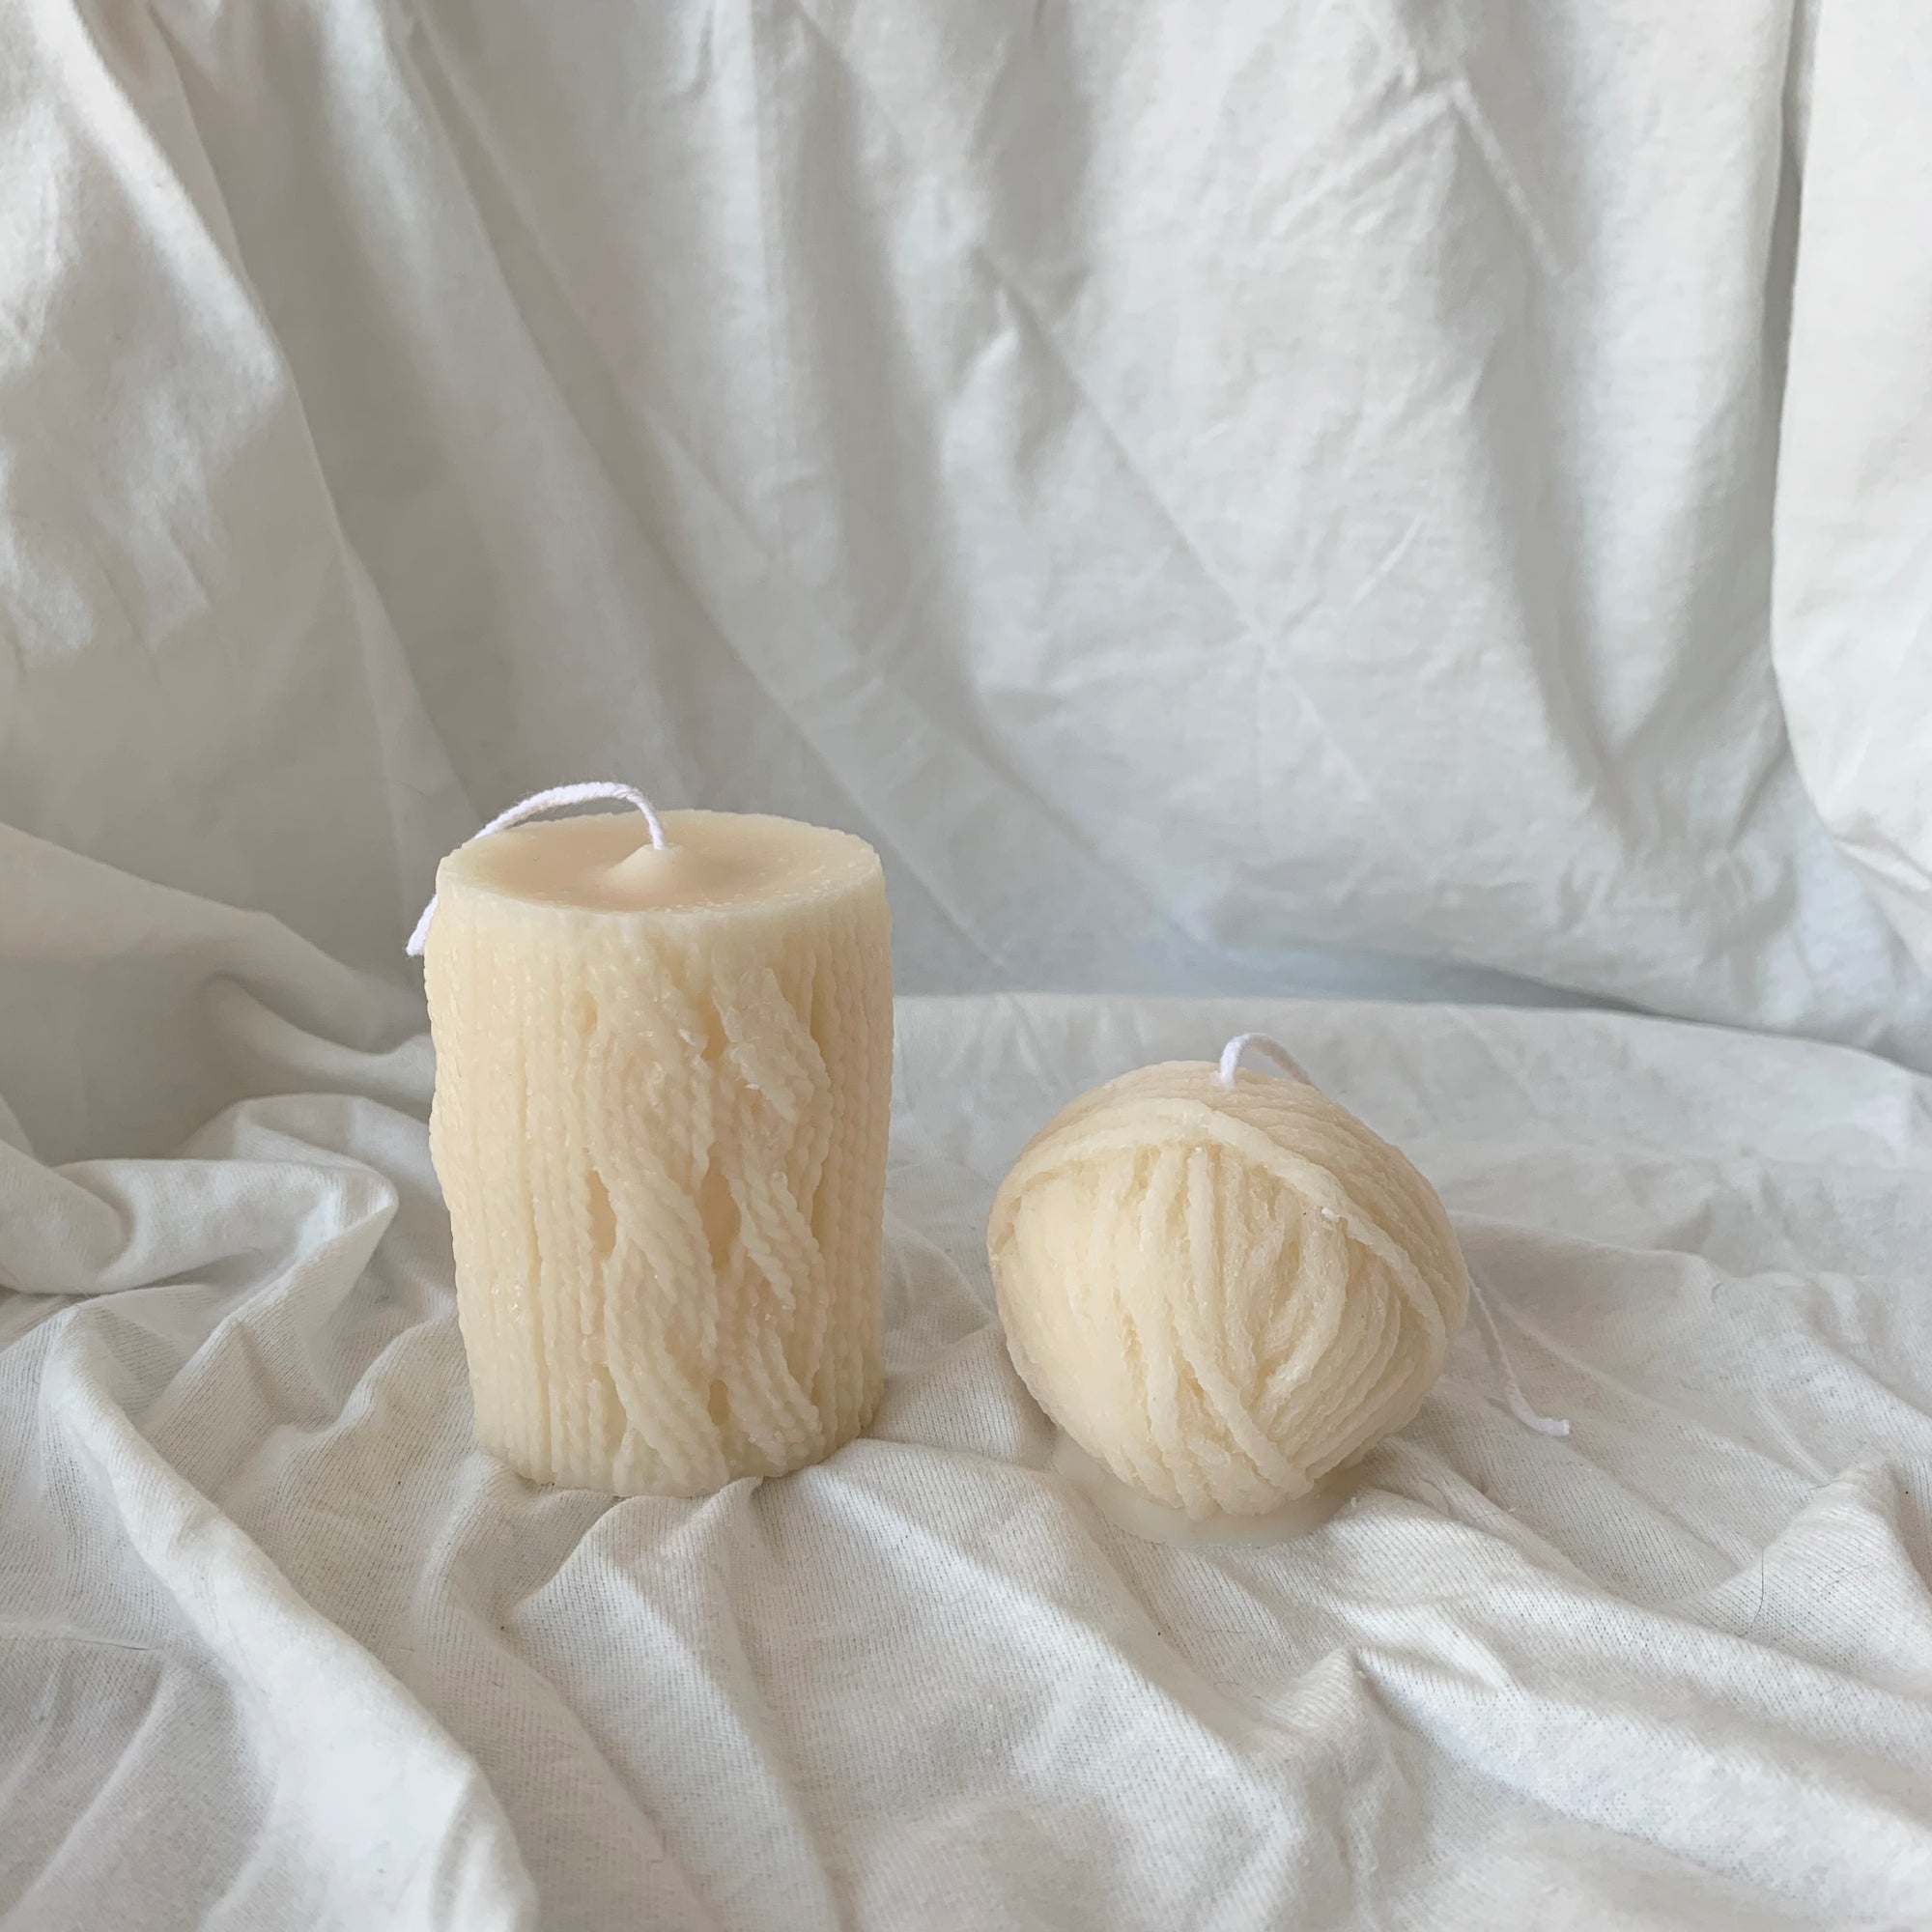 【No Color】Yarn Ball Candle & Knitted Candle│ Kawaii Candle